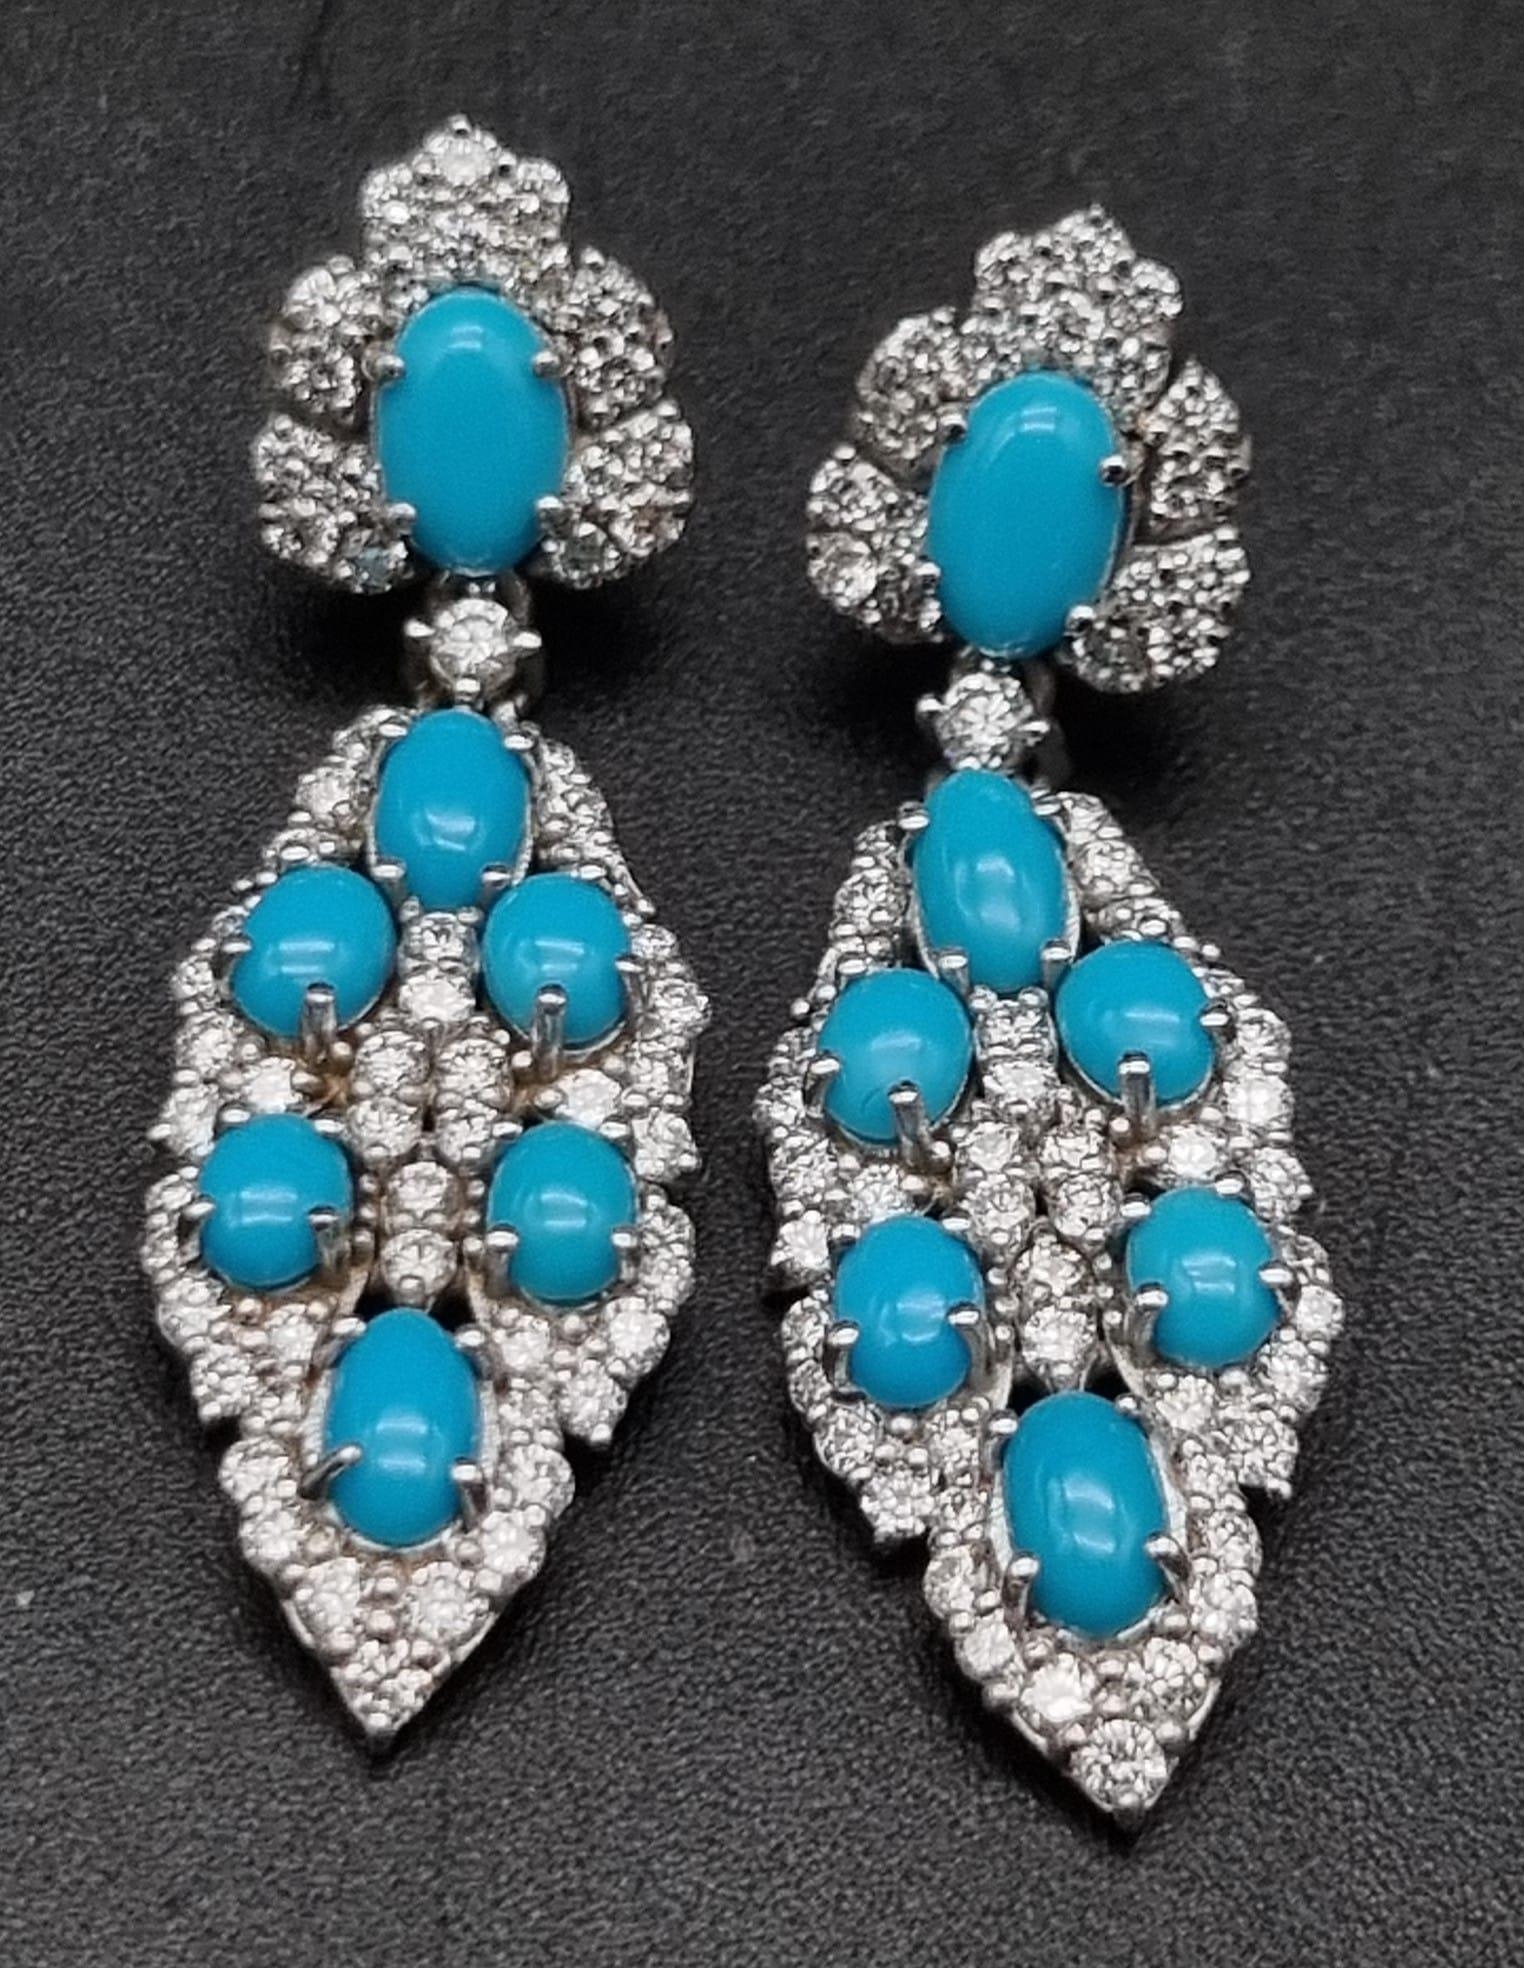 A Pair of Vintage 18K White Gold Diamond and Turquoise Earrings. A turquoise cabochon surrounded